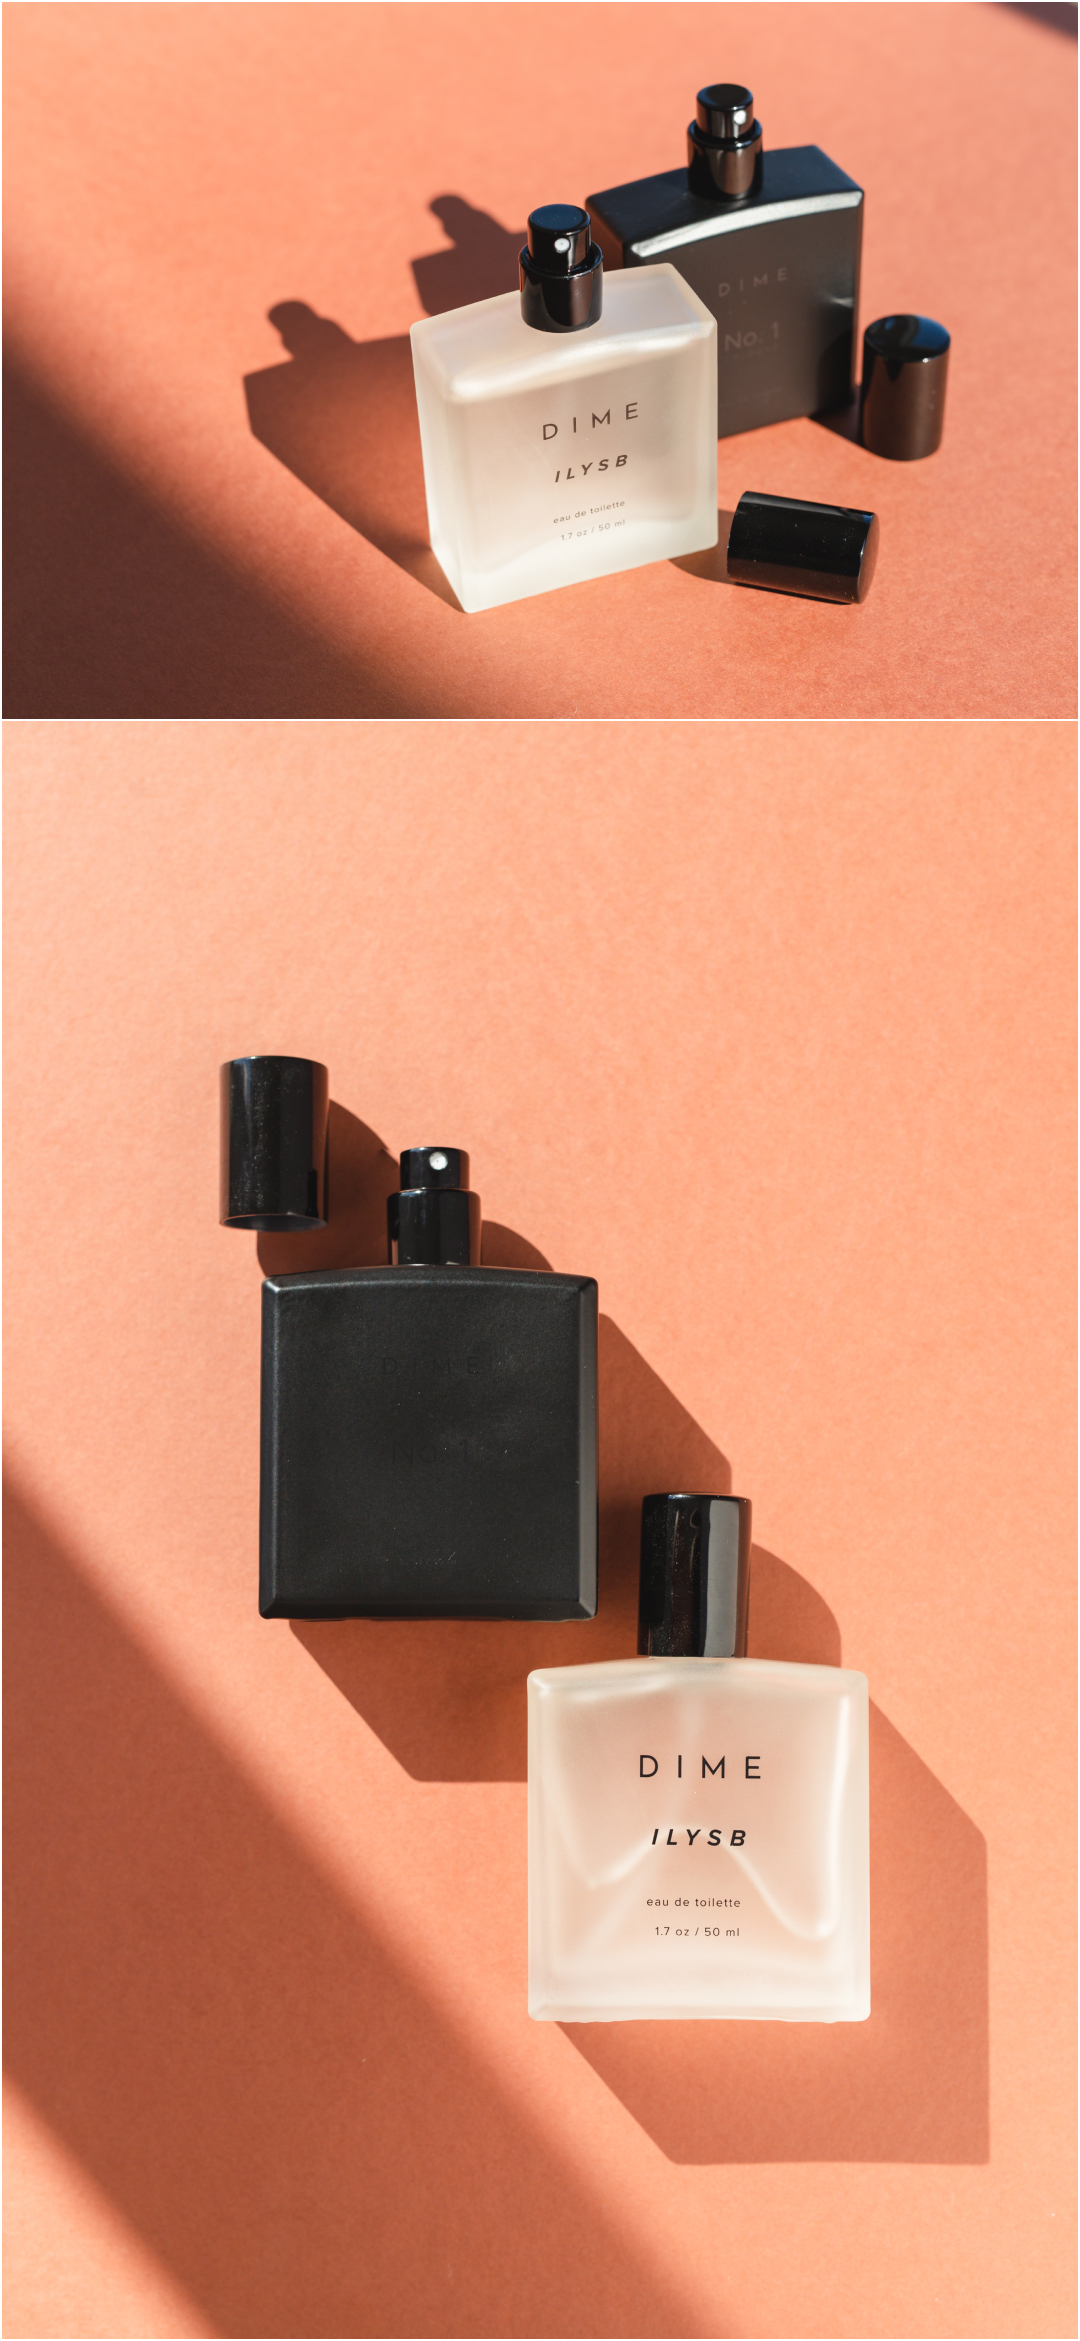 Perfume Product Photographer - Flat Lay Product Photography